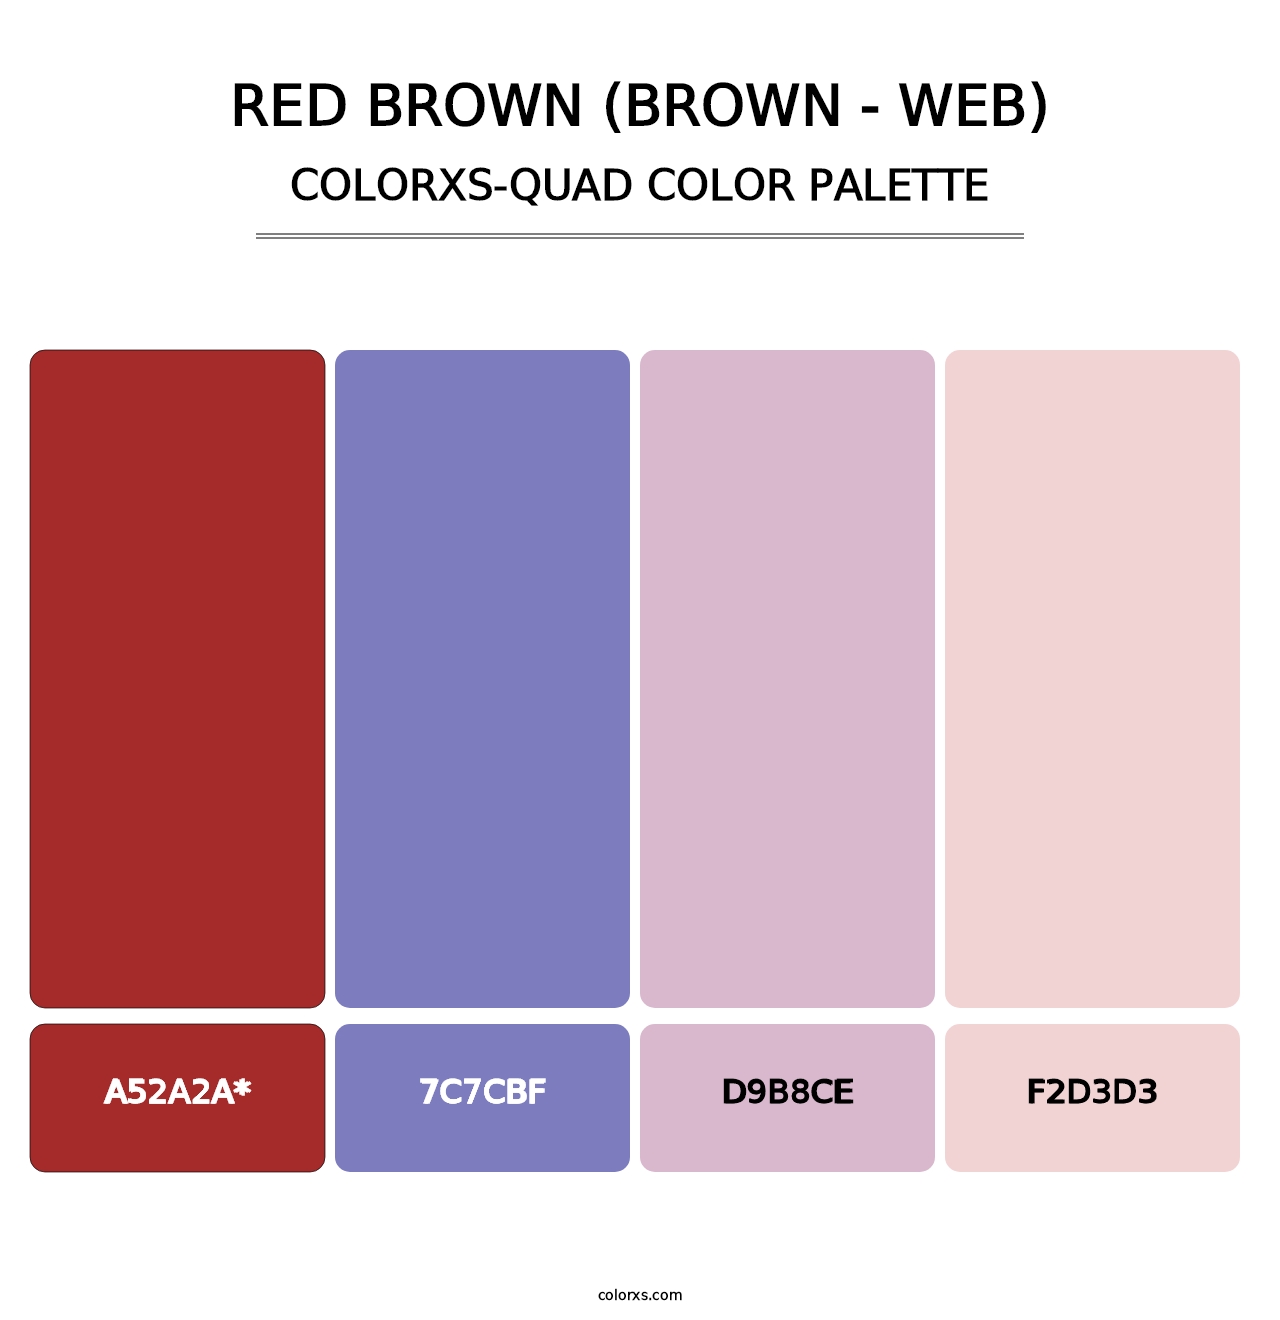 Red Brown (Brown - Web) - Colorxs Quad Palette